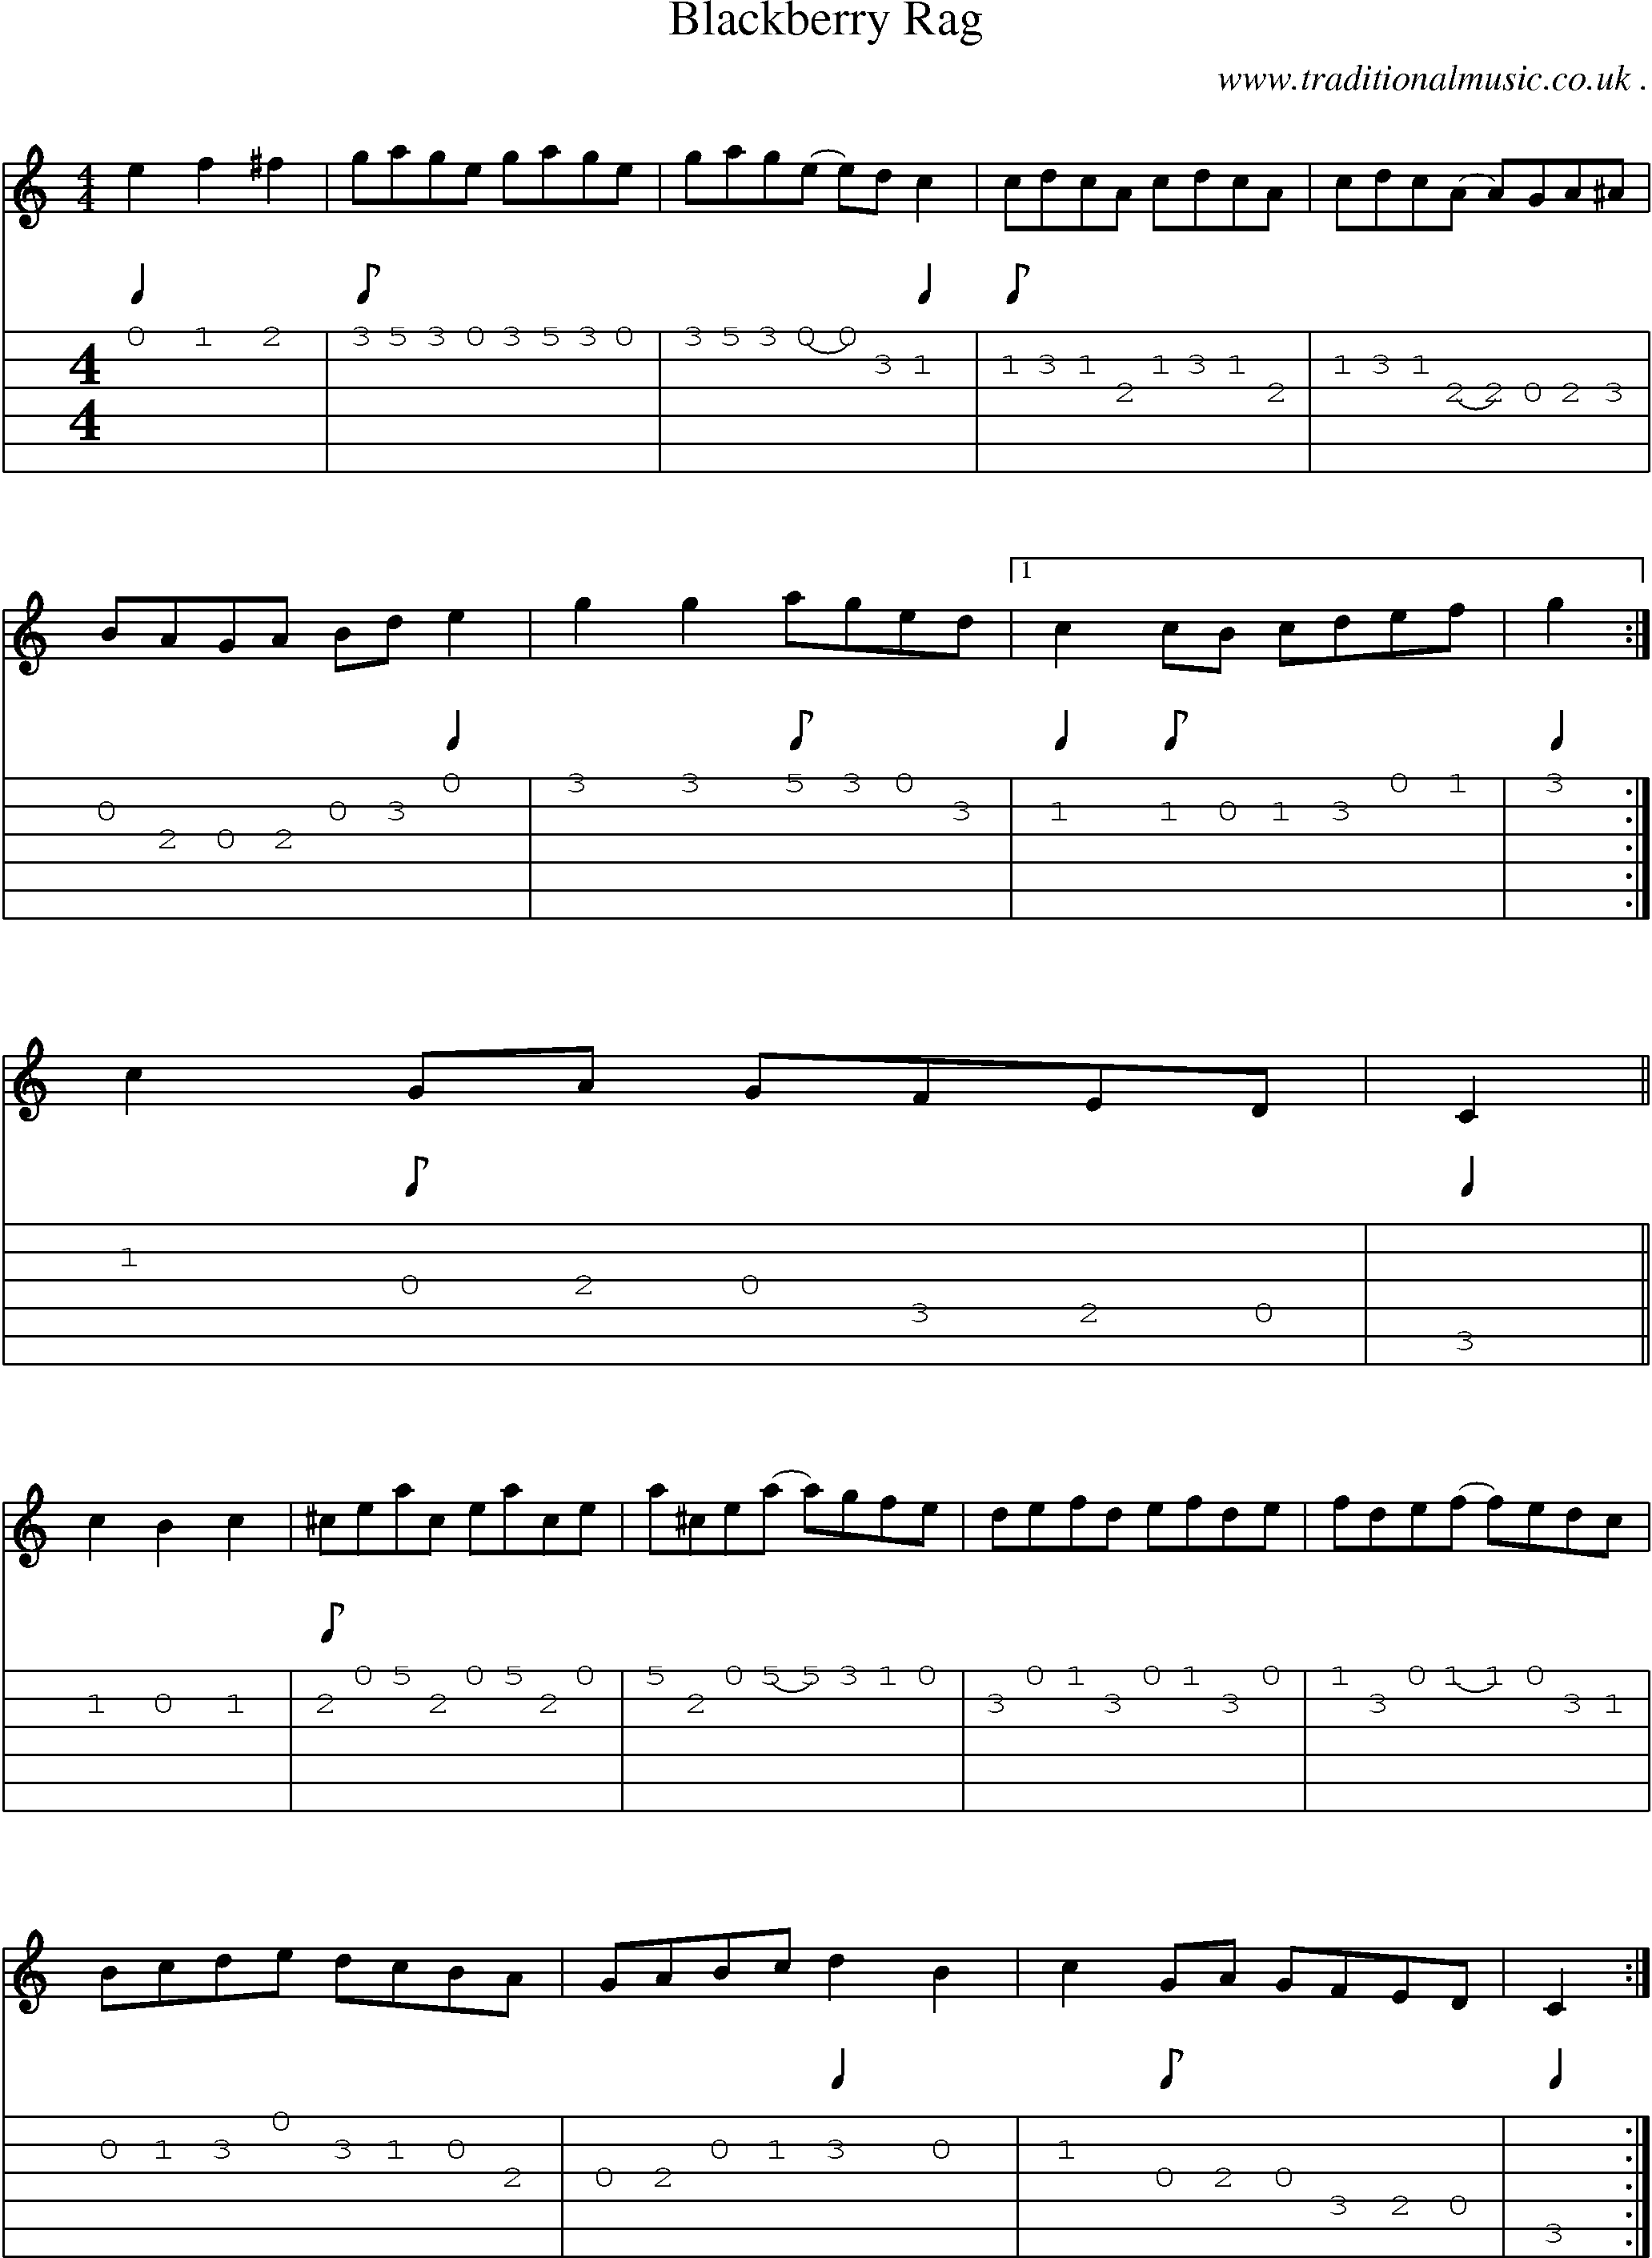 Music Score and Guitar Tabs for Blackberry Rag